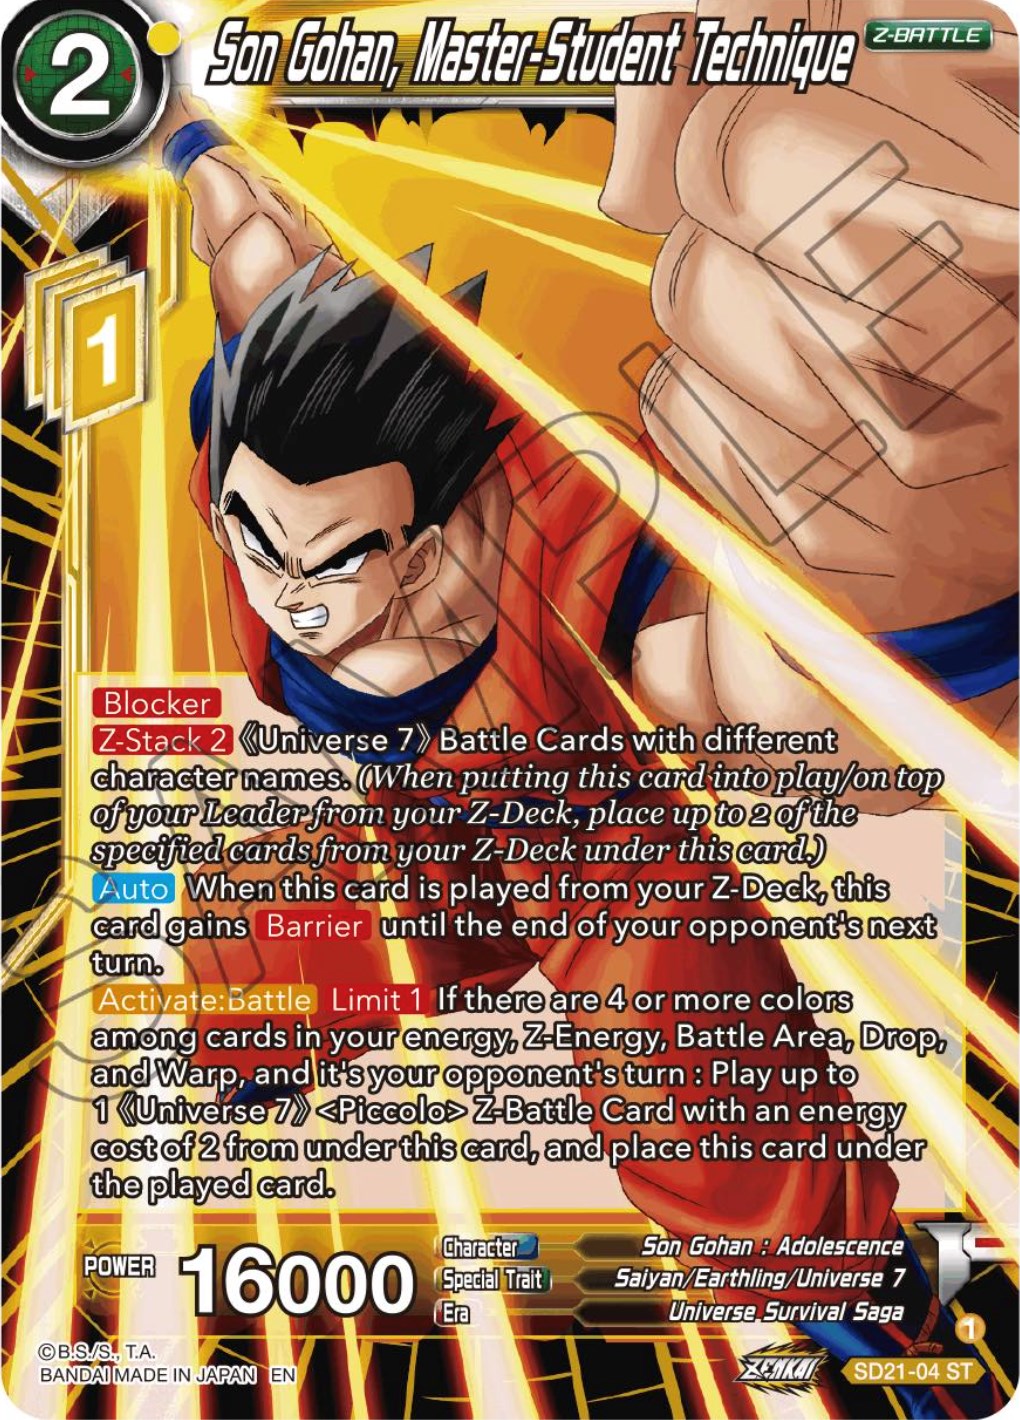 Son Gohan, Master-Student Technique (Starter Deck Exclusive) (SD21-04) [Power Absorbed] | North Valley Games